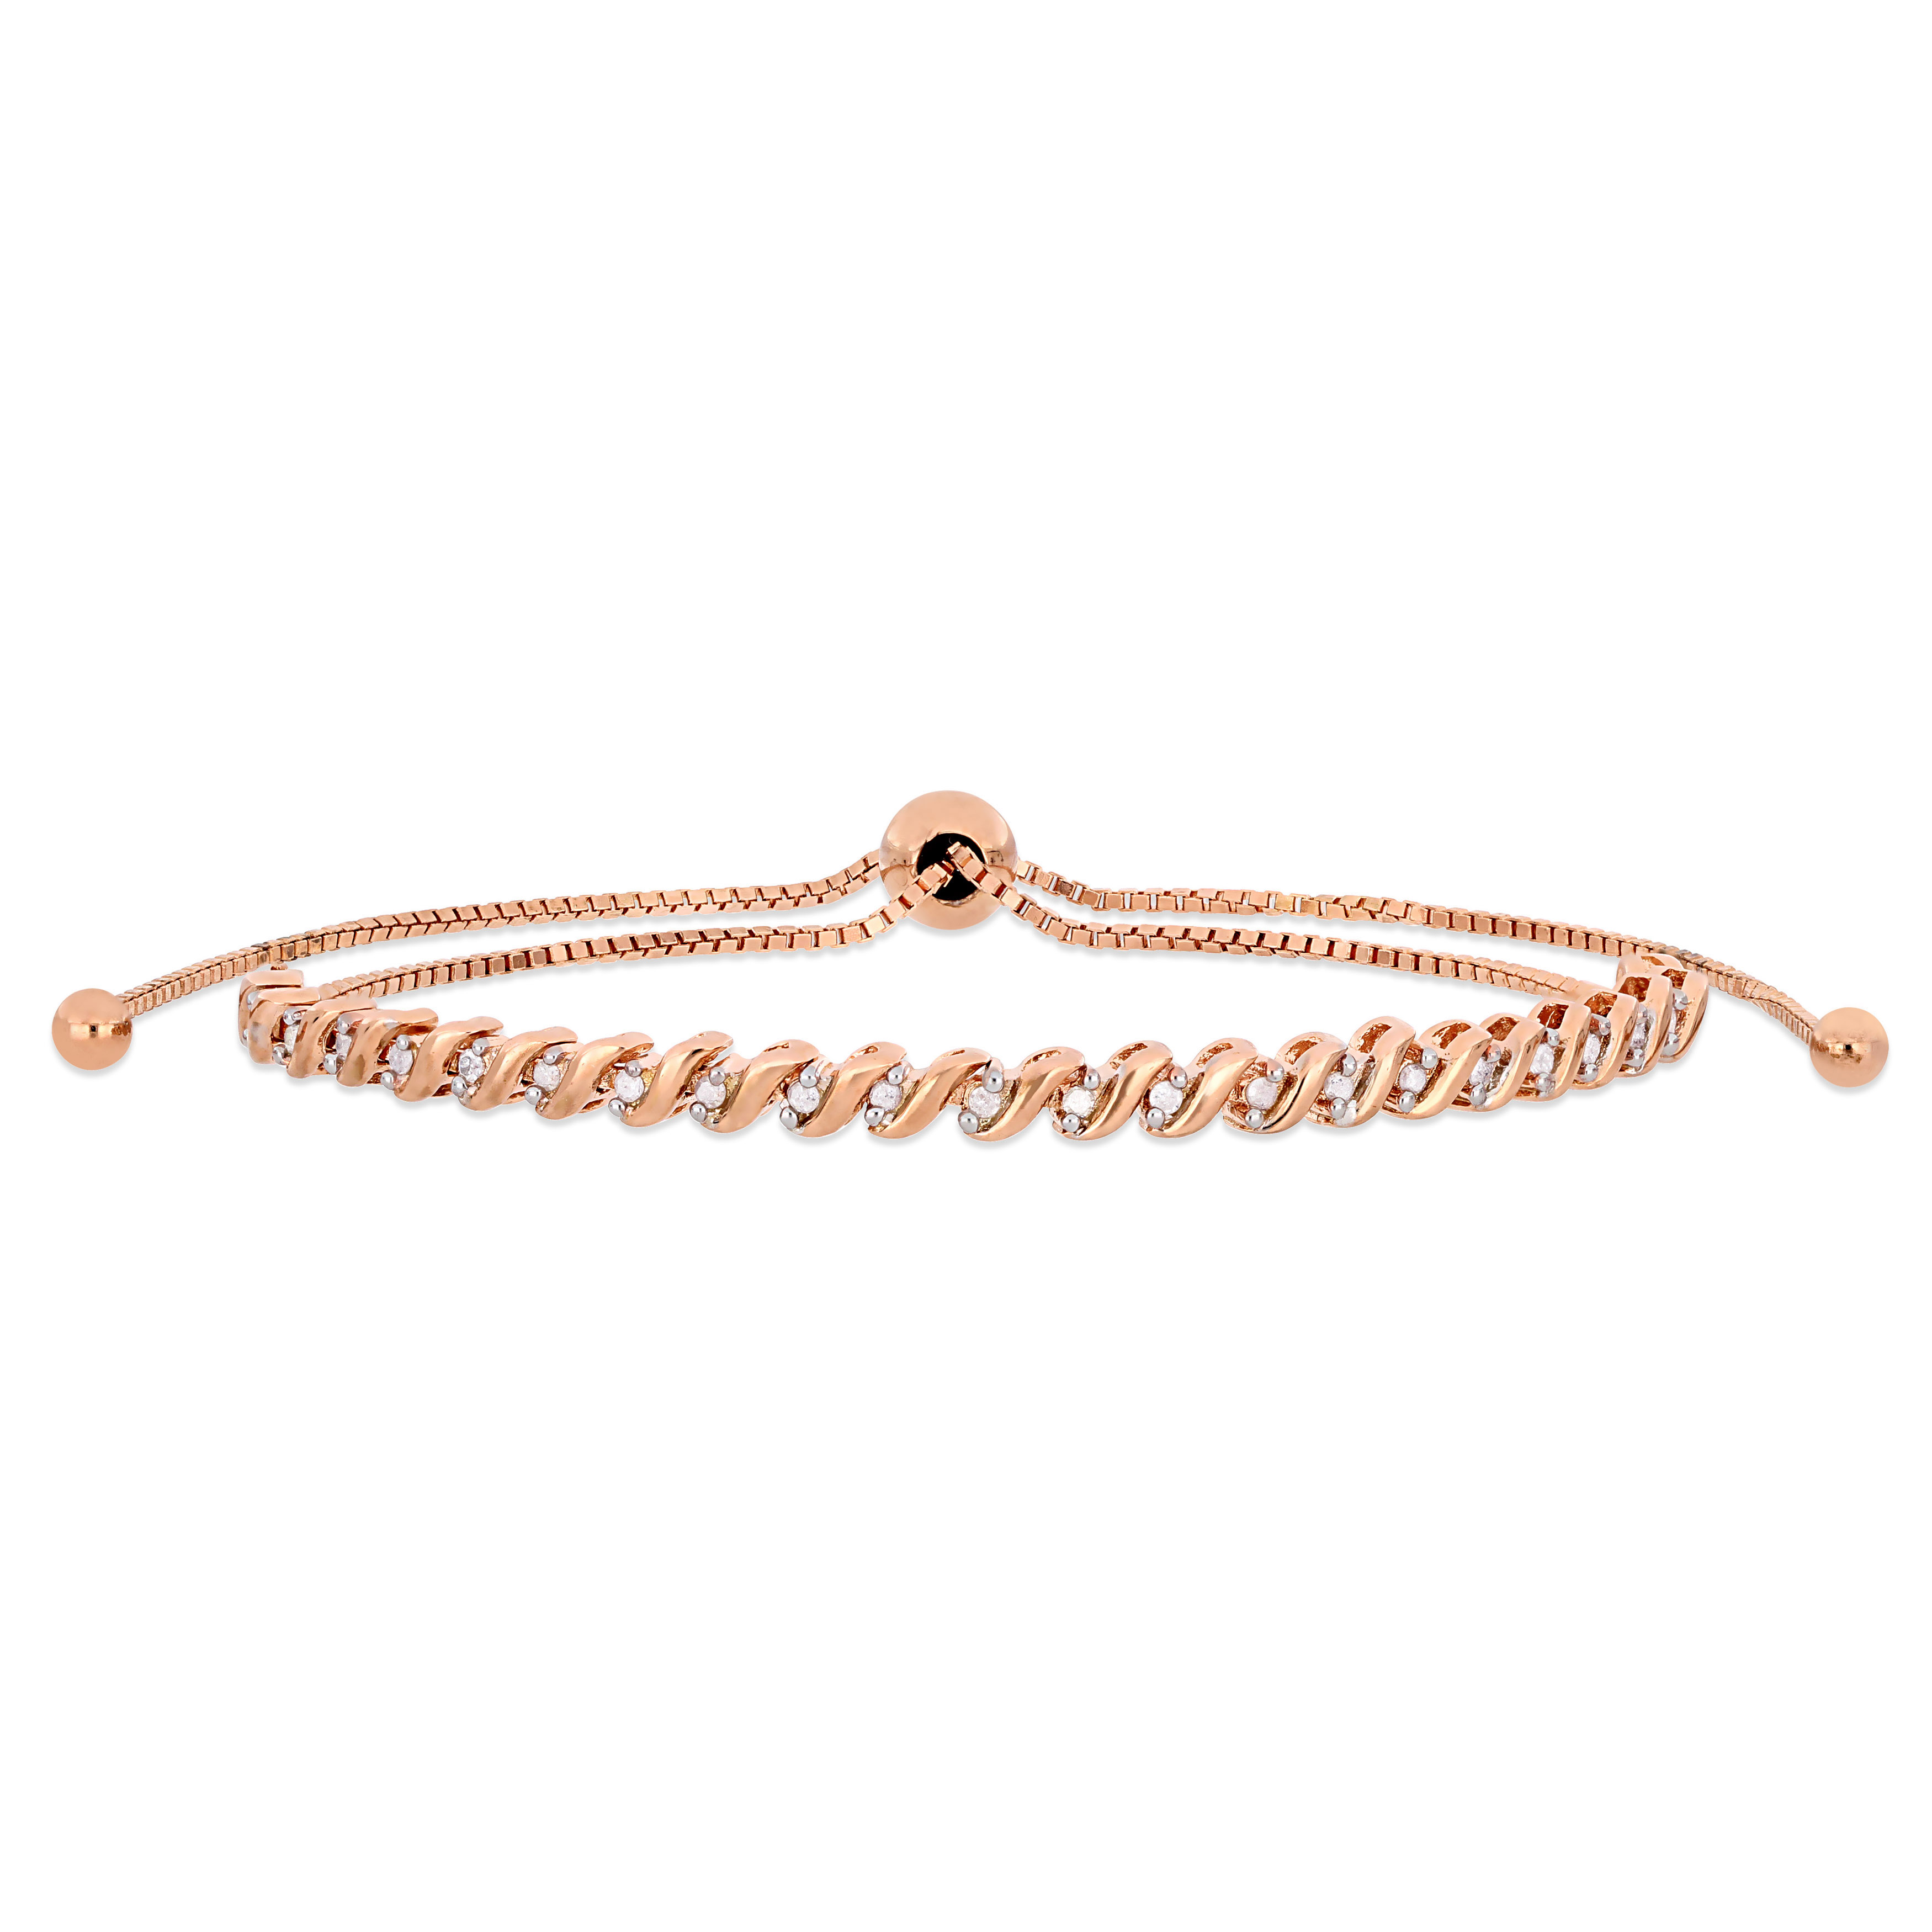 1/4 CT TW Diamond Bolo Bracelet in Rose Plated Sterling Silver - 5-10 in.